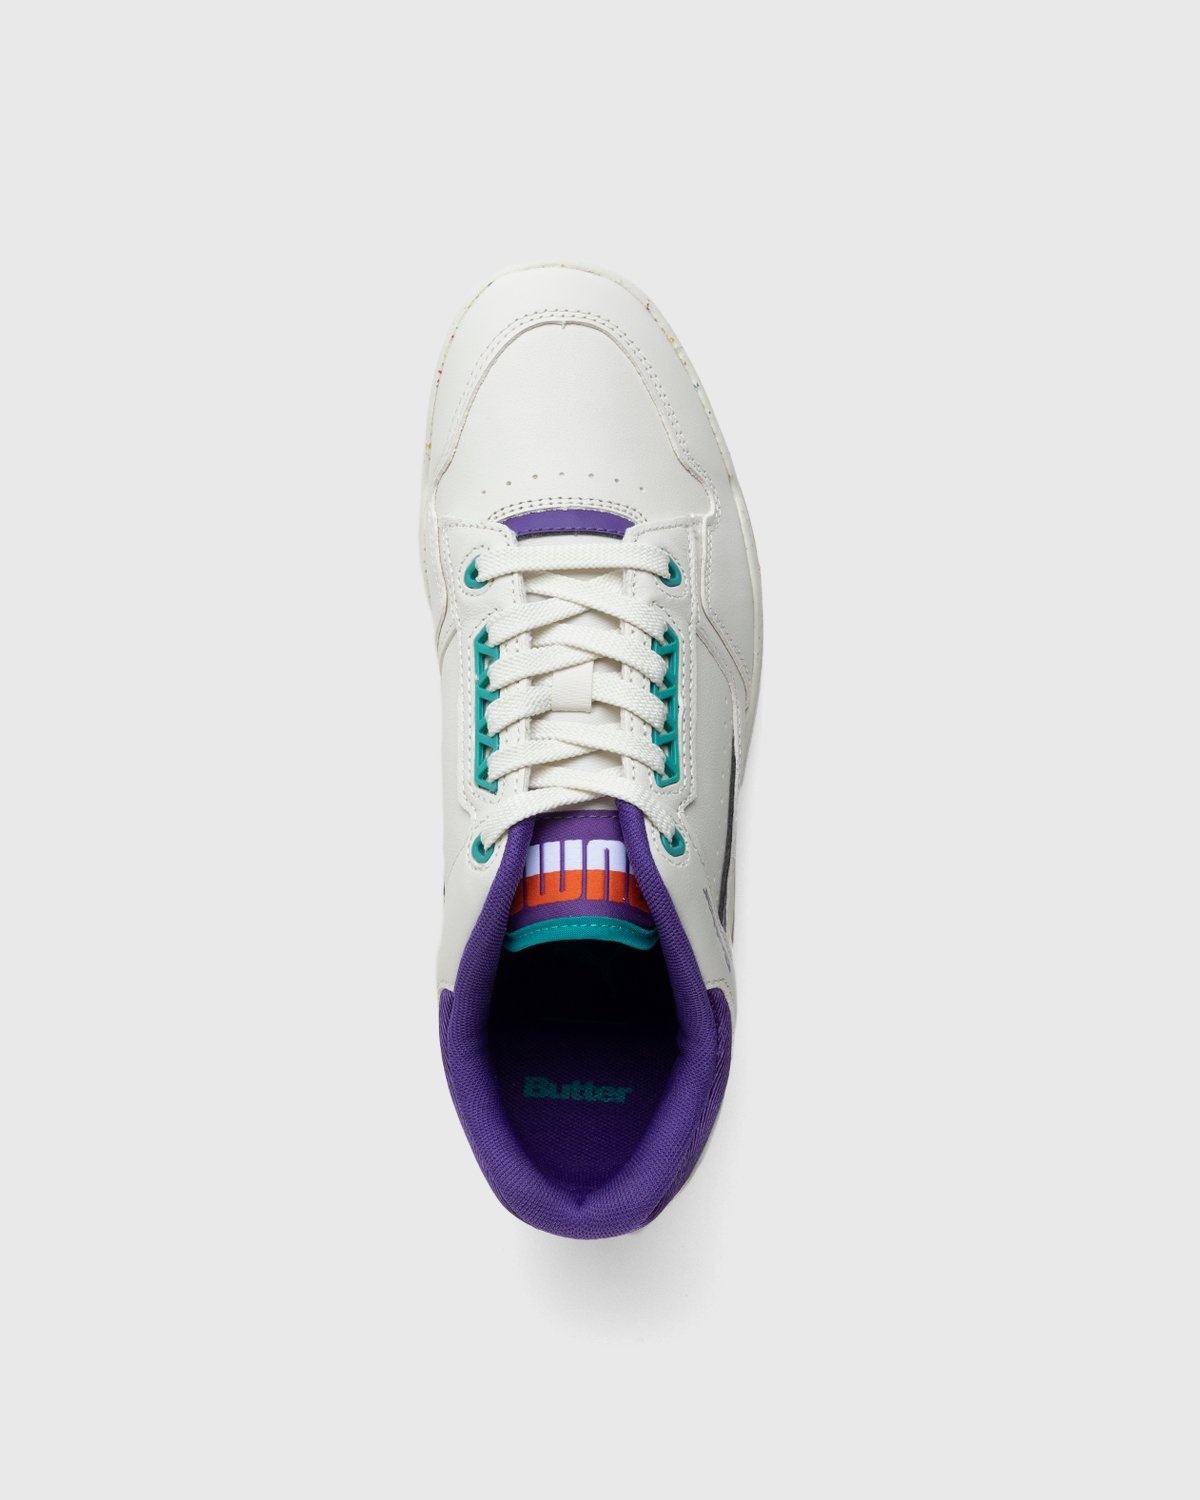 Puma x Butter Goods – Slipstream Lo Whisper White/Prism Violet/Navigate - Low Top Sneakers - Black - Image 6